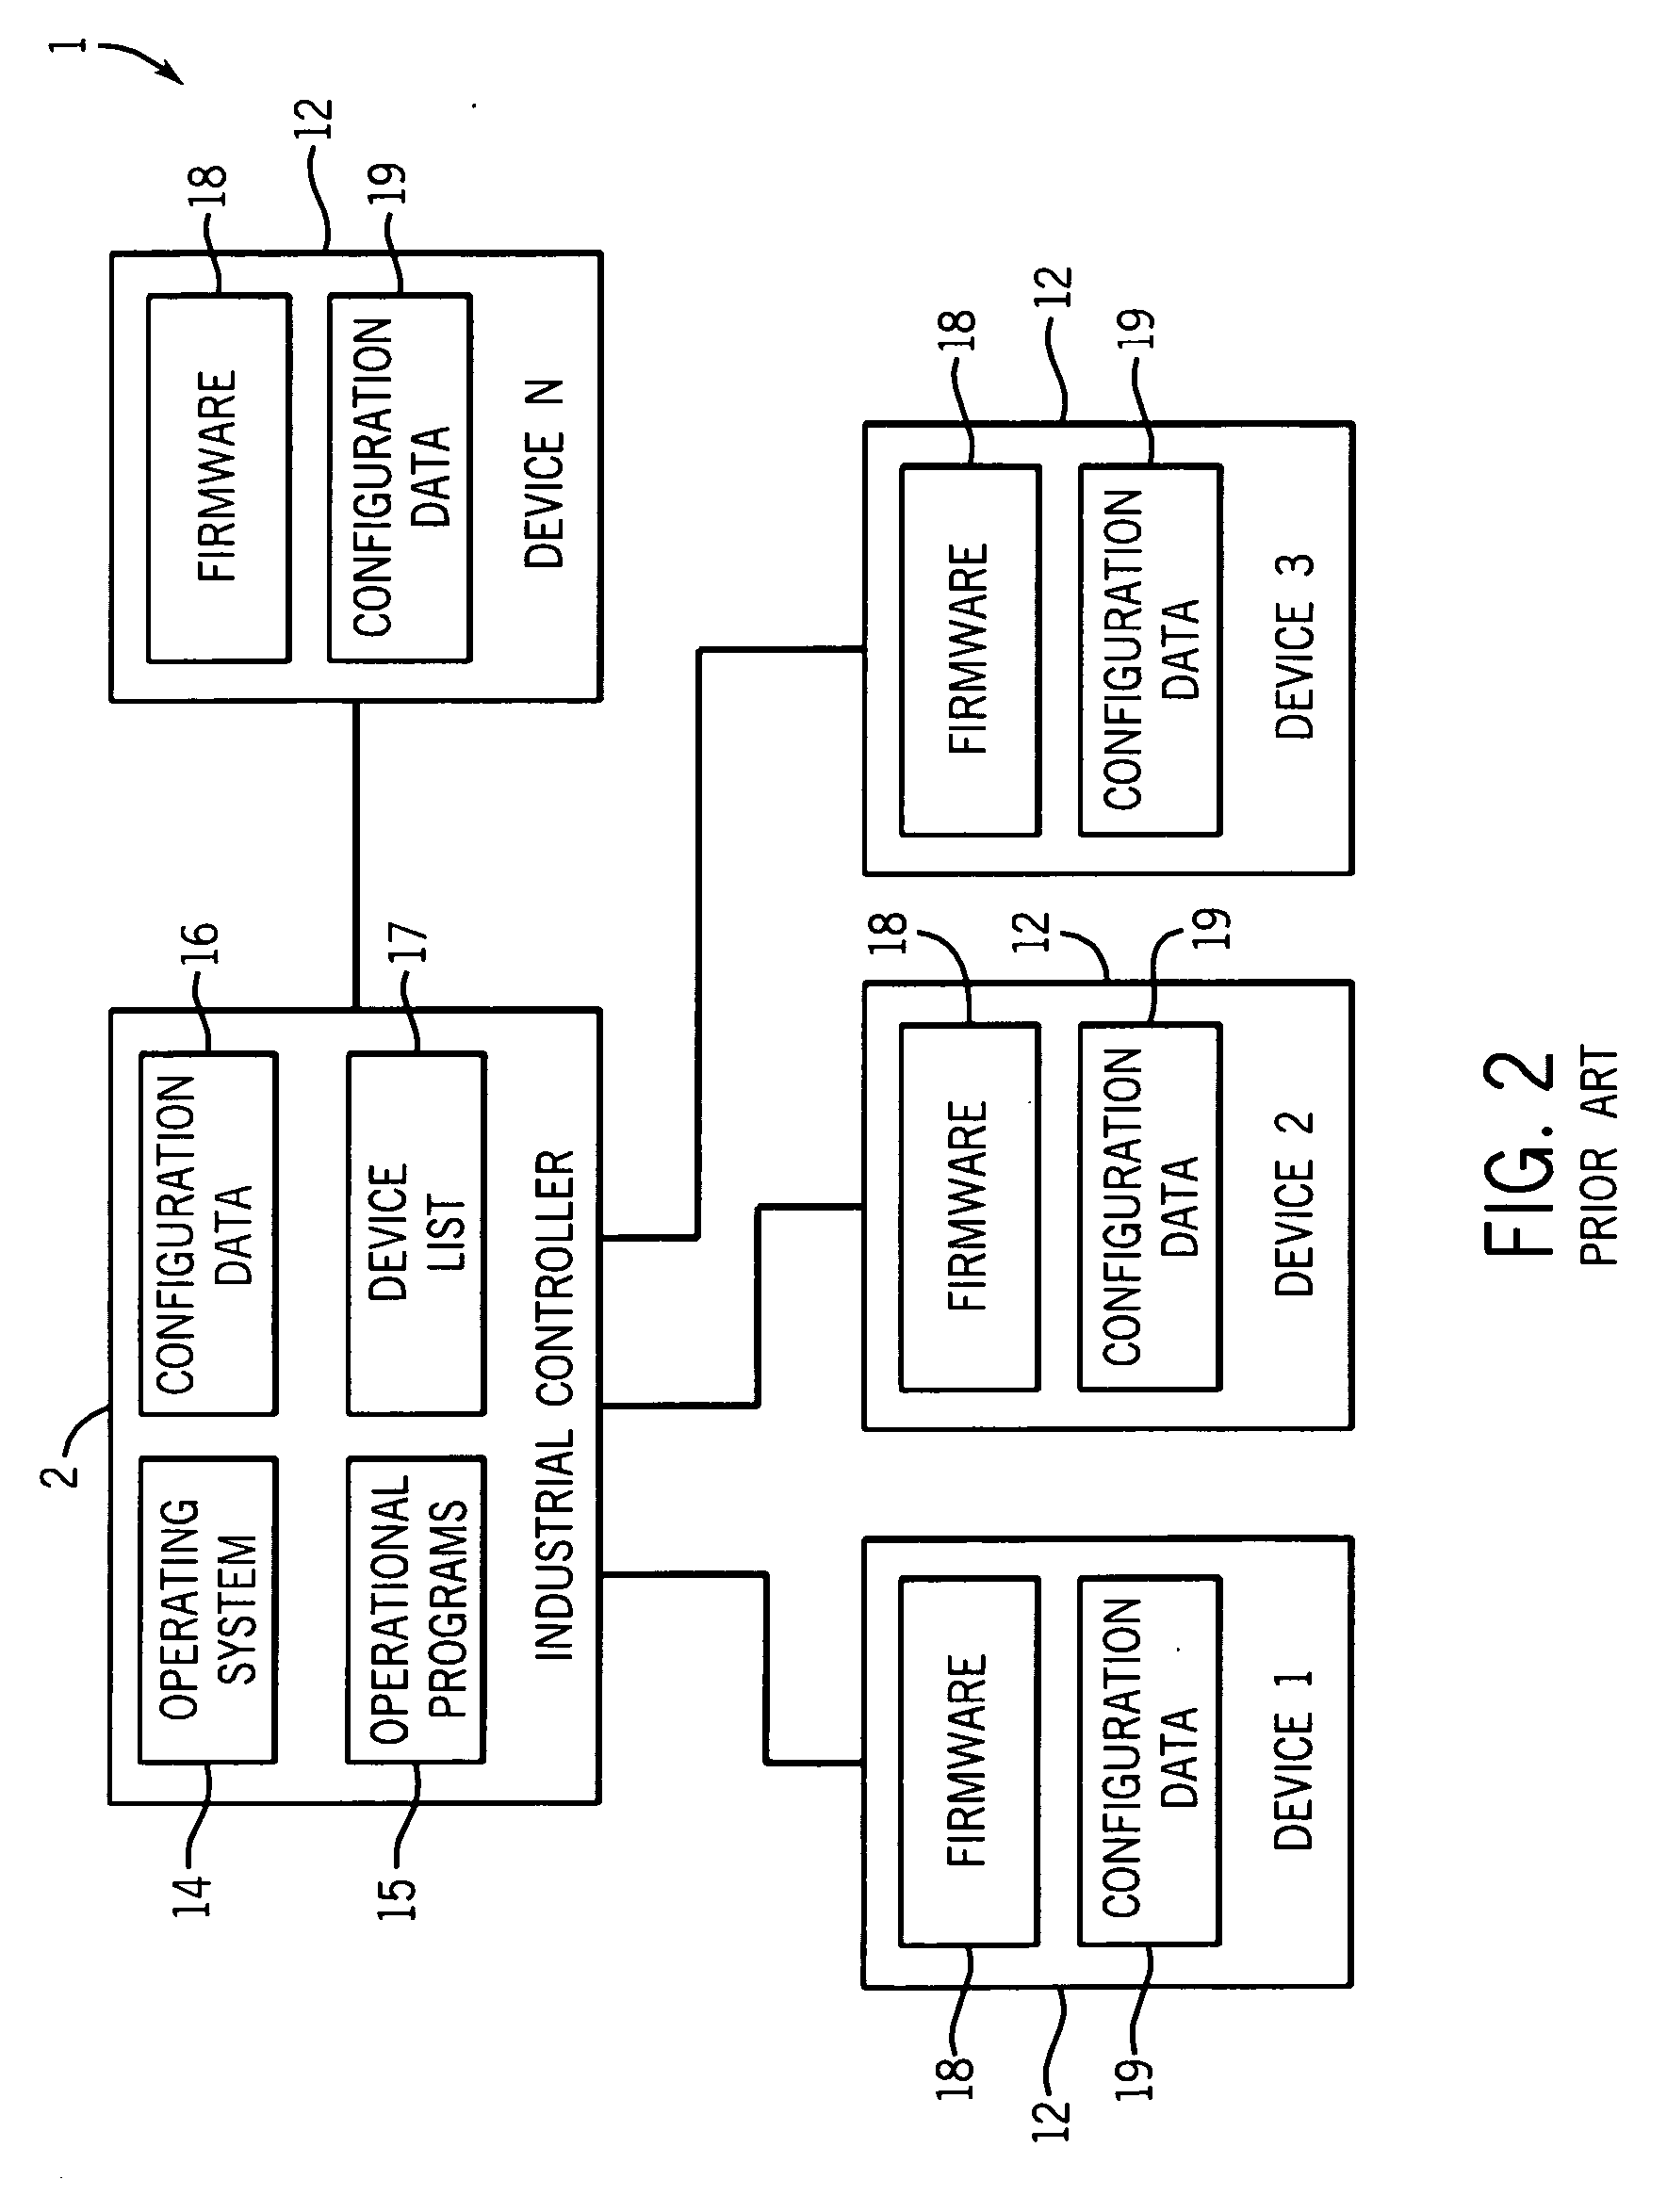 System and method for automatically matching programmable data of devices within an industrial control system